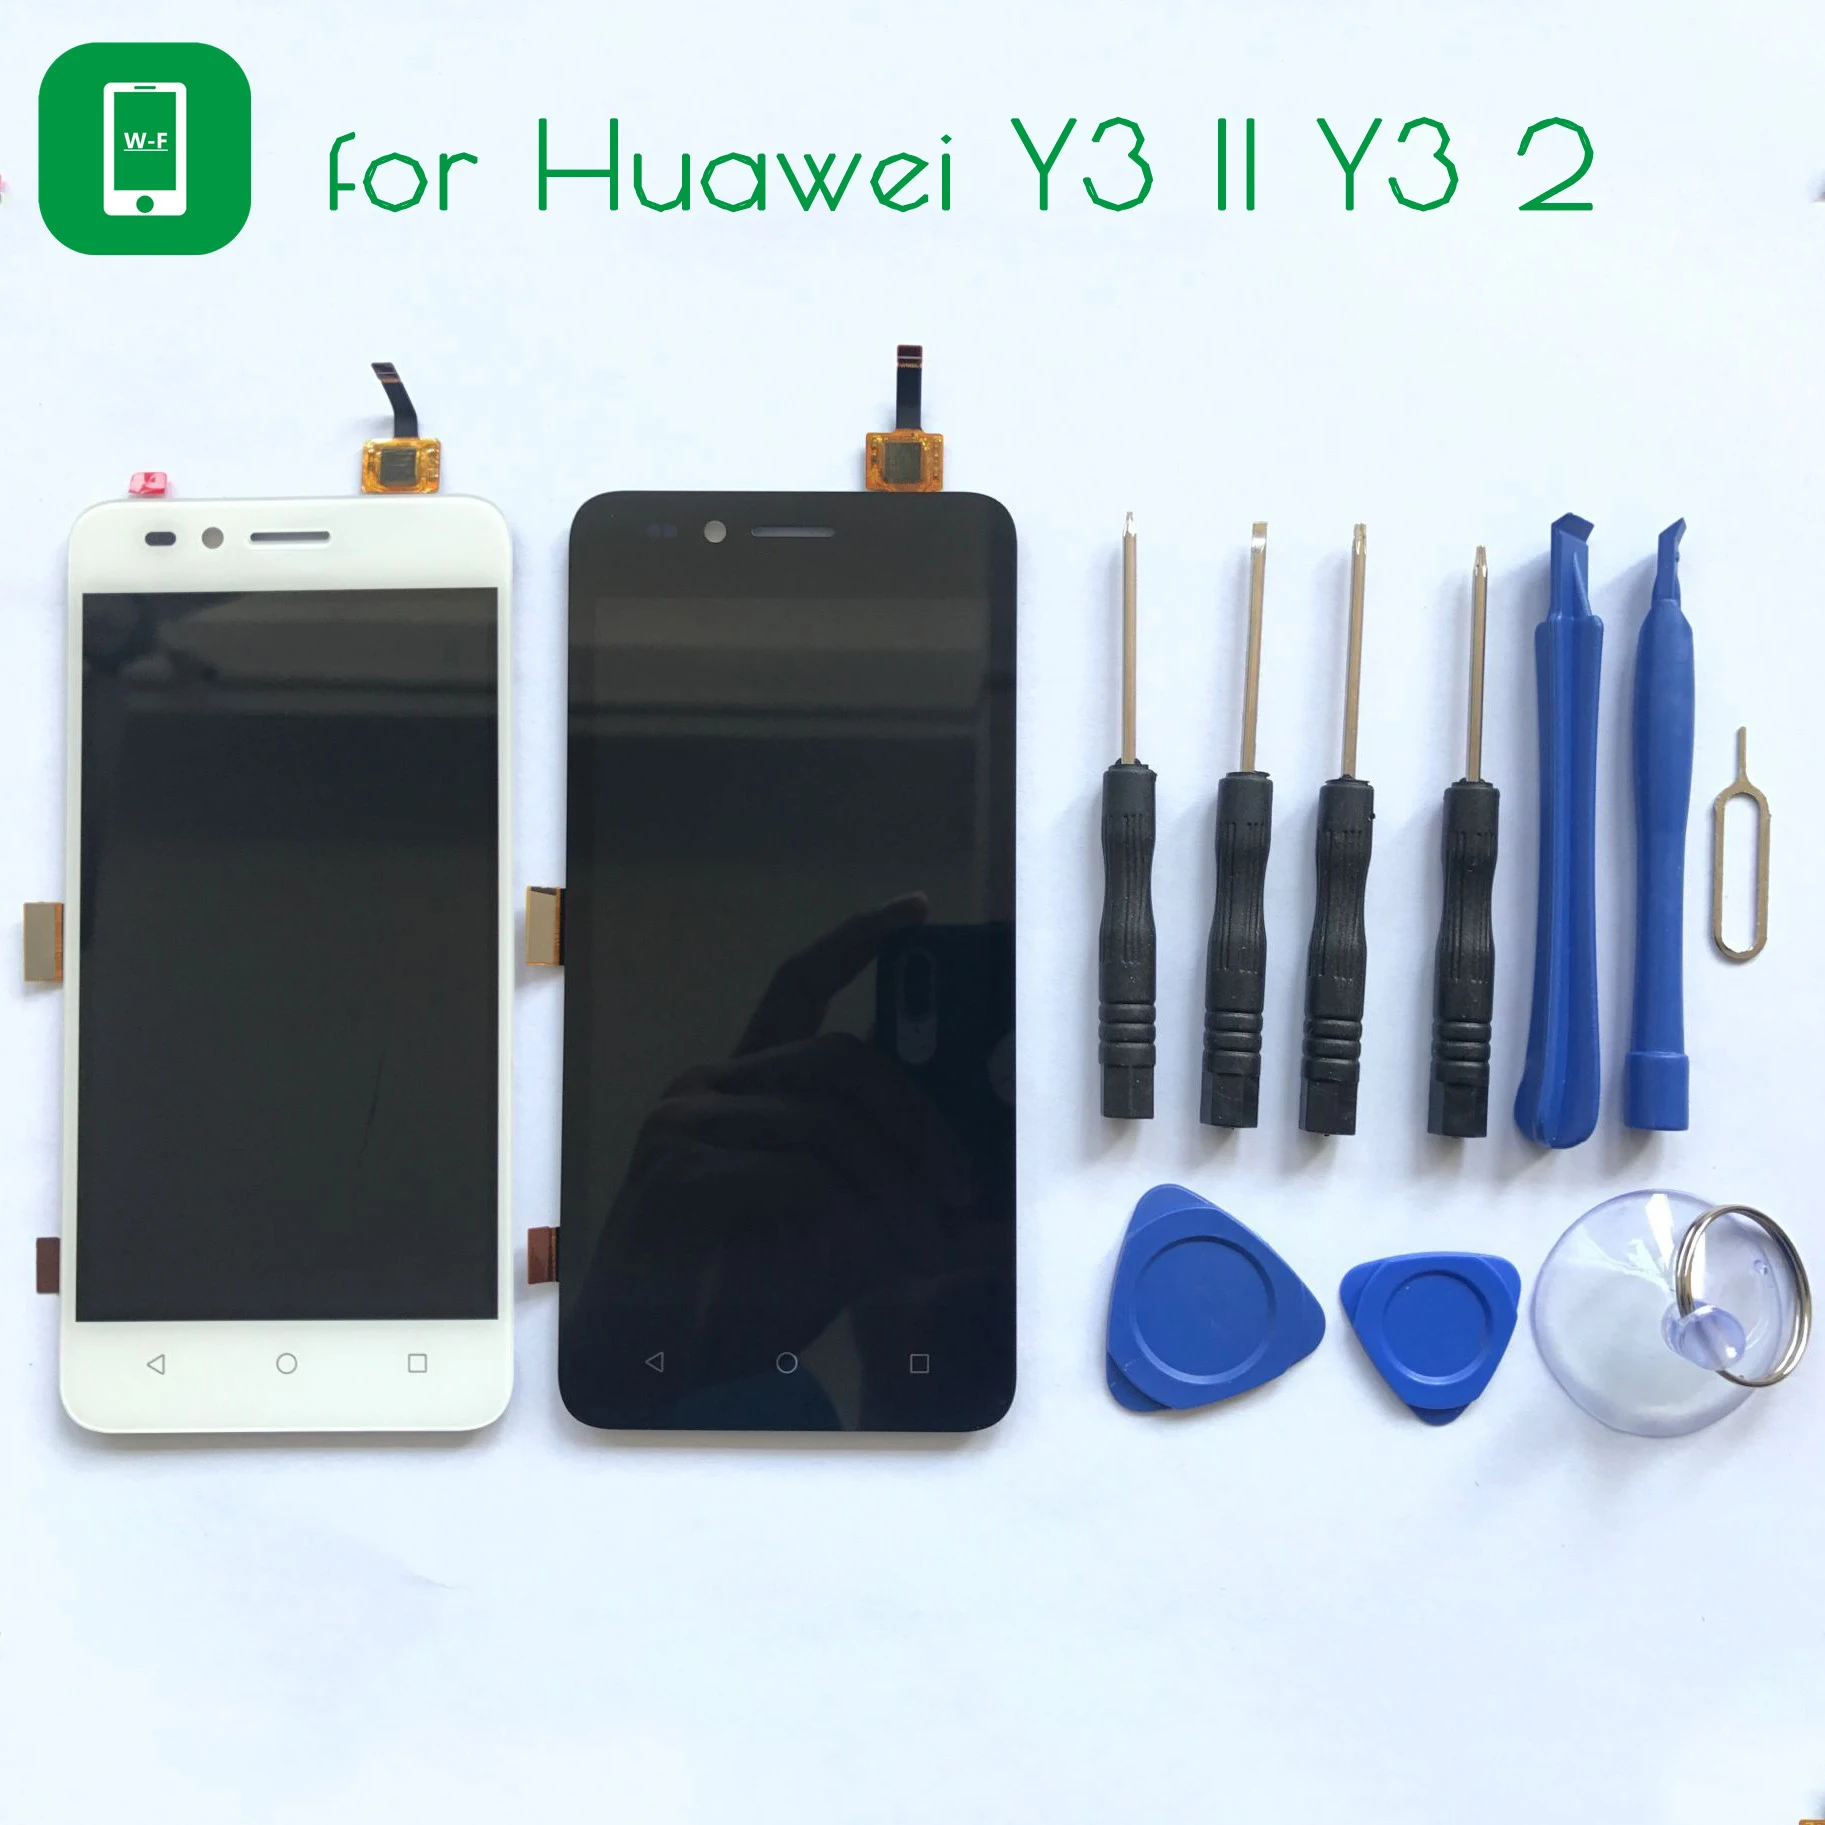 For Huawei Y3 II Y3 2 Y3II LCD Display+Touch Screen with Tools Glass Panel Accessories Replacement For Huawei Y3 II Y3 2 Y3II